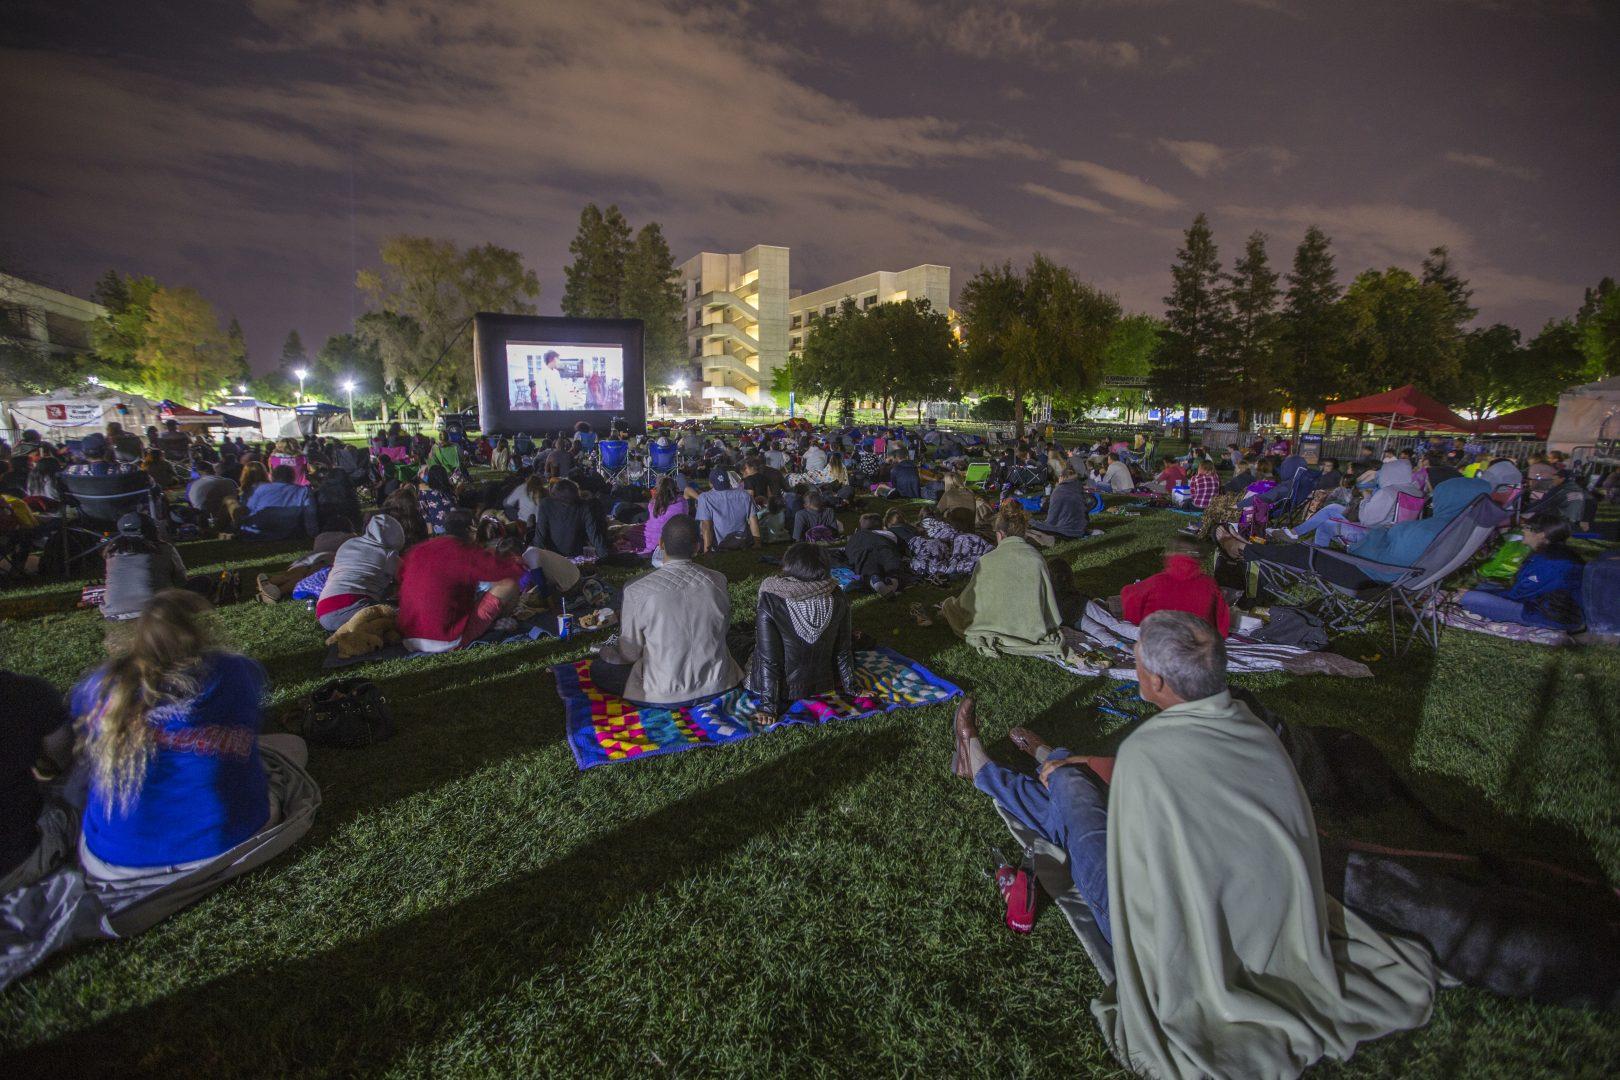 The Fresno State community watches “Back to the Future “ on Vintage Day night Saturday April 22, 2017. Back to the Future is a 1980s sci-fi film of a small-town California teen Marty McFly (Michael J. Fox), who’s thrown back into the ‘50s by a scientist friend Doc Brown (Christopher Lloyd).  (Khone Saysamongdy/ The Collegian)